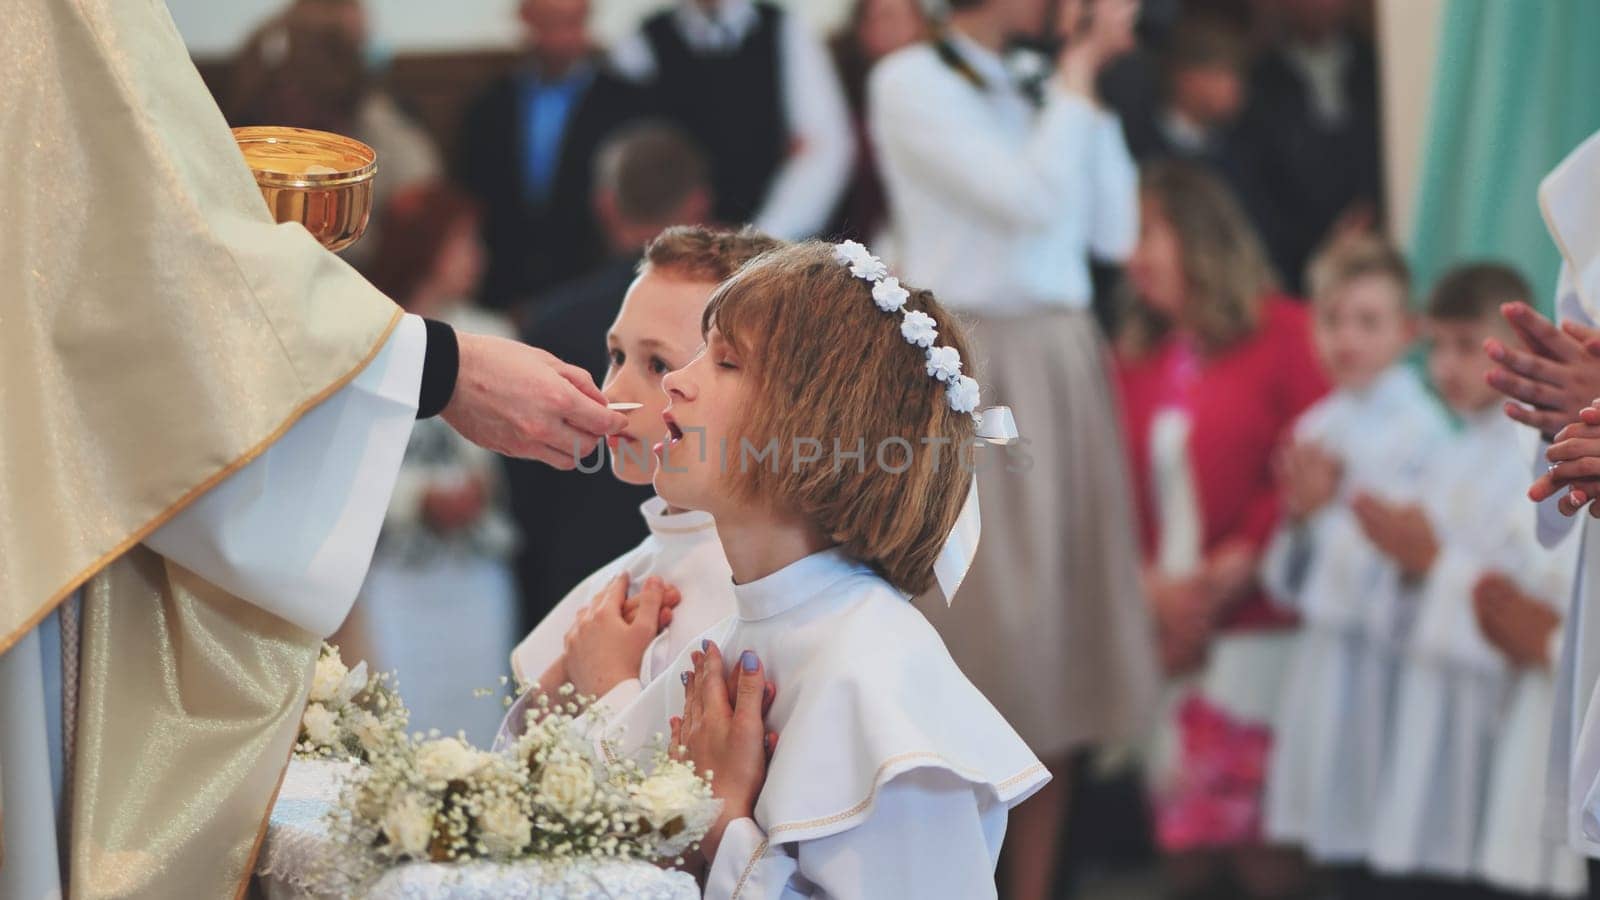 Lida, Belarus - May 31, 2022: Children going to the first holy communion. by DovidPro